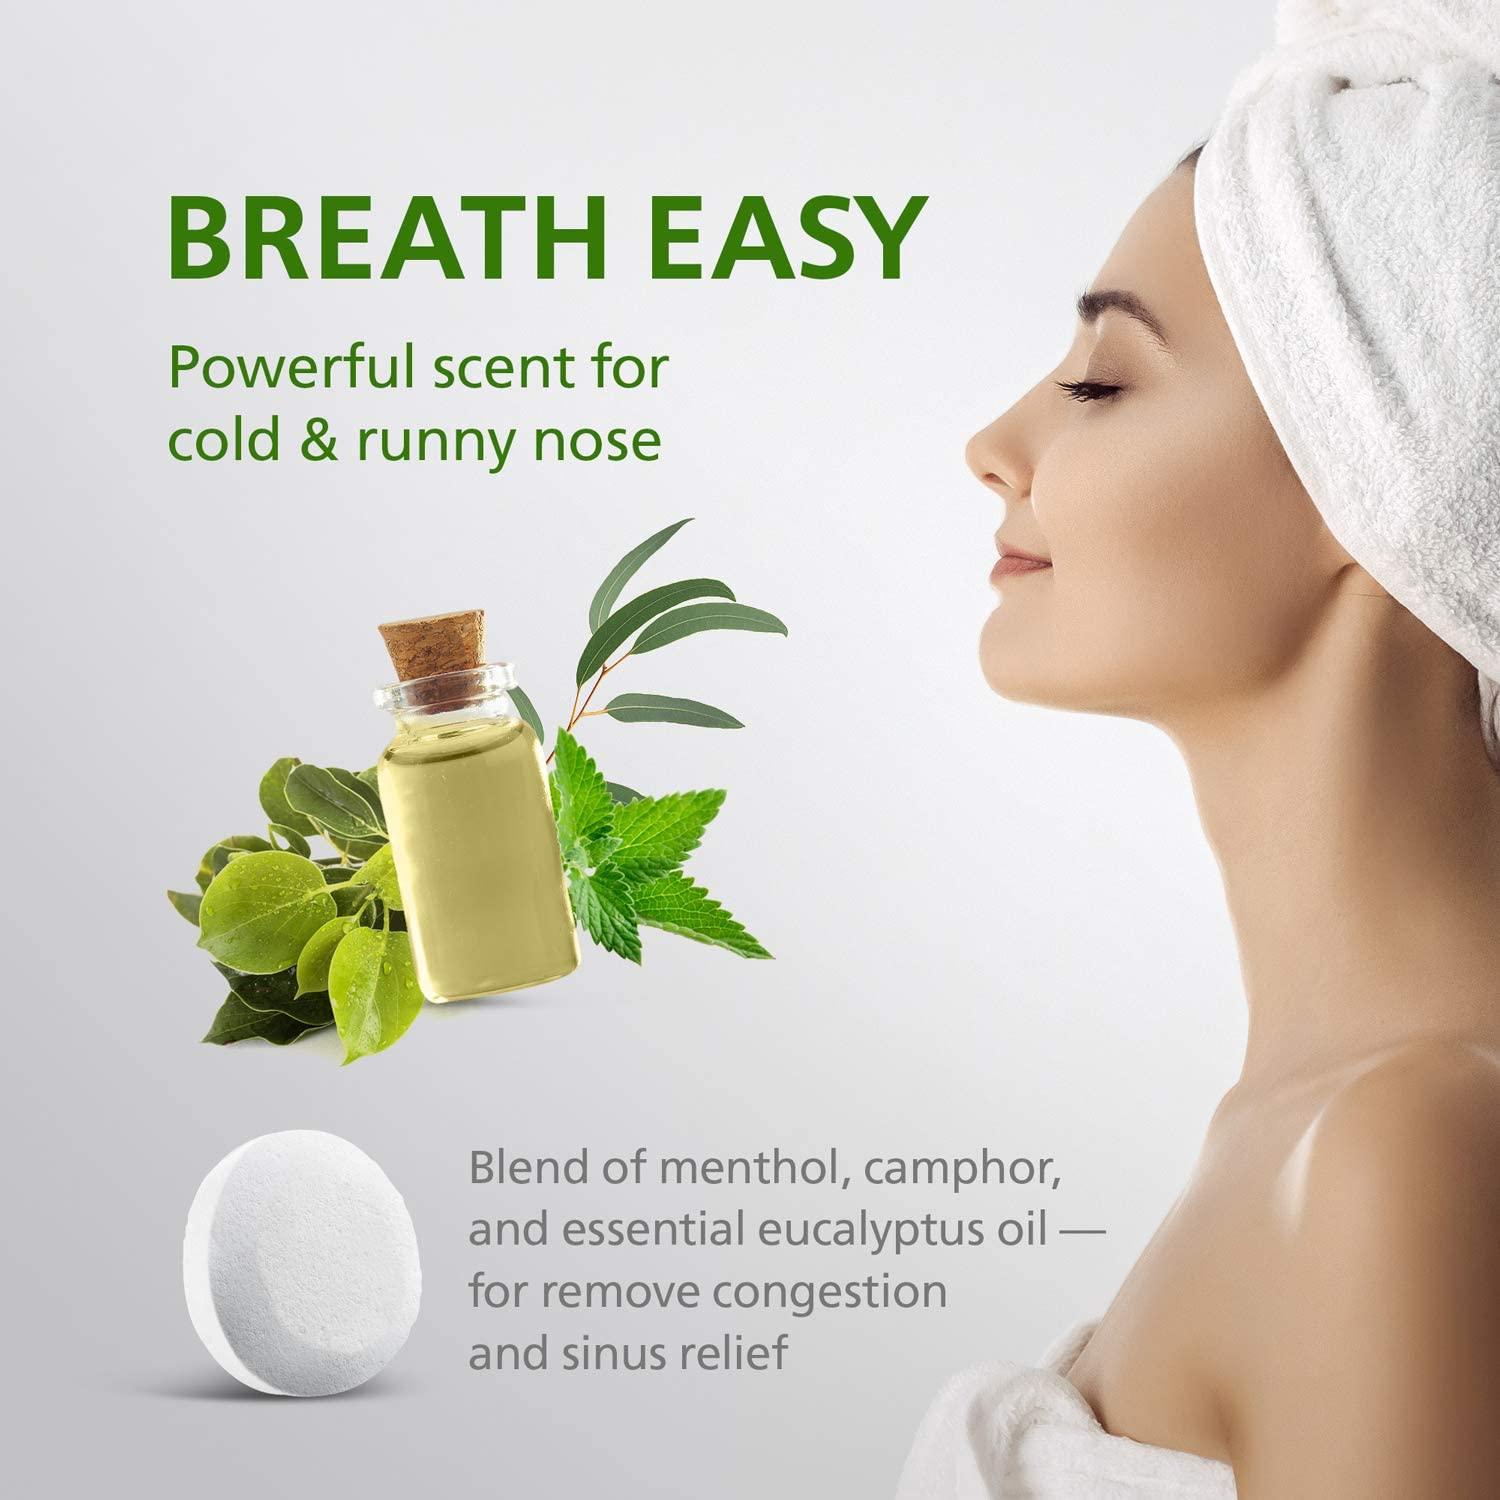 Natural Eucalyptus and Mint Shower Steam Vapor Tablets for Decongestion in  Throat or Chest, Aromatherapy and Stress Relief Self Care